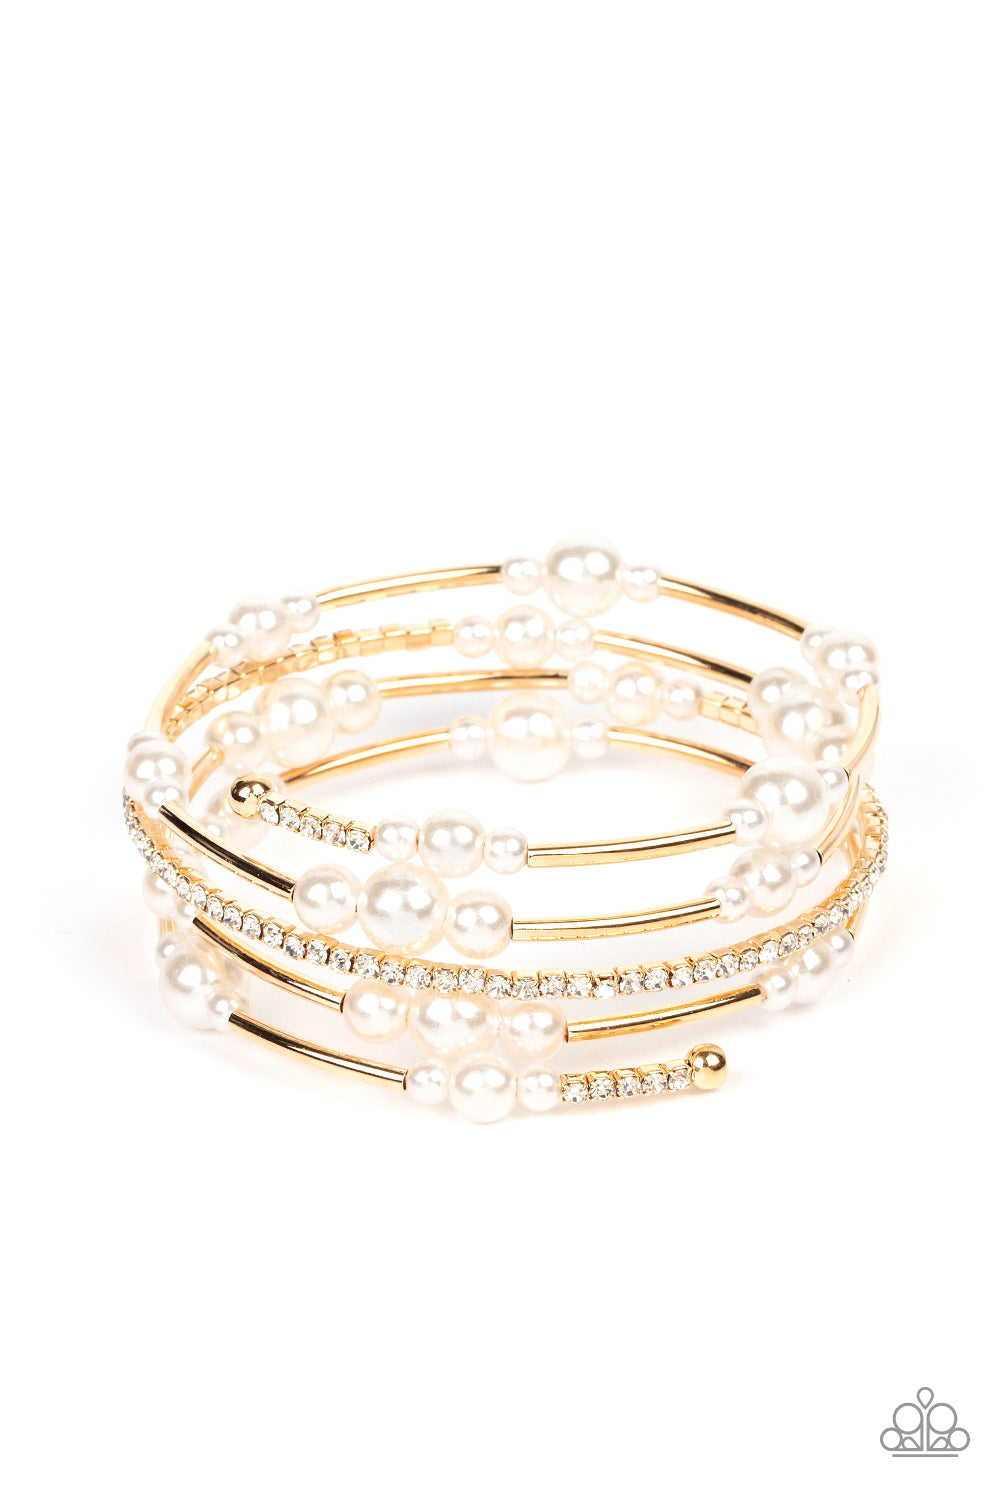 Paparazzi Accessories Marina Masterpiece - Gold Bubbly white pearls, cylindrical gold beads, and glassy white rhinestones are threaded along a coiled wire, resulting in a timeless infinity wrap bracelet around the wrist. Sold as one individual bracelet. J